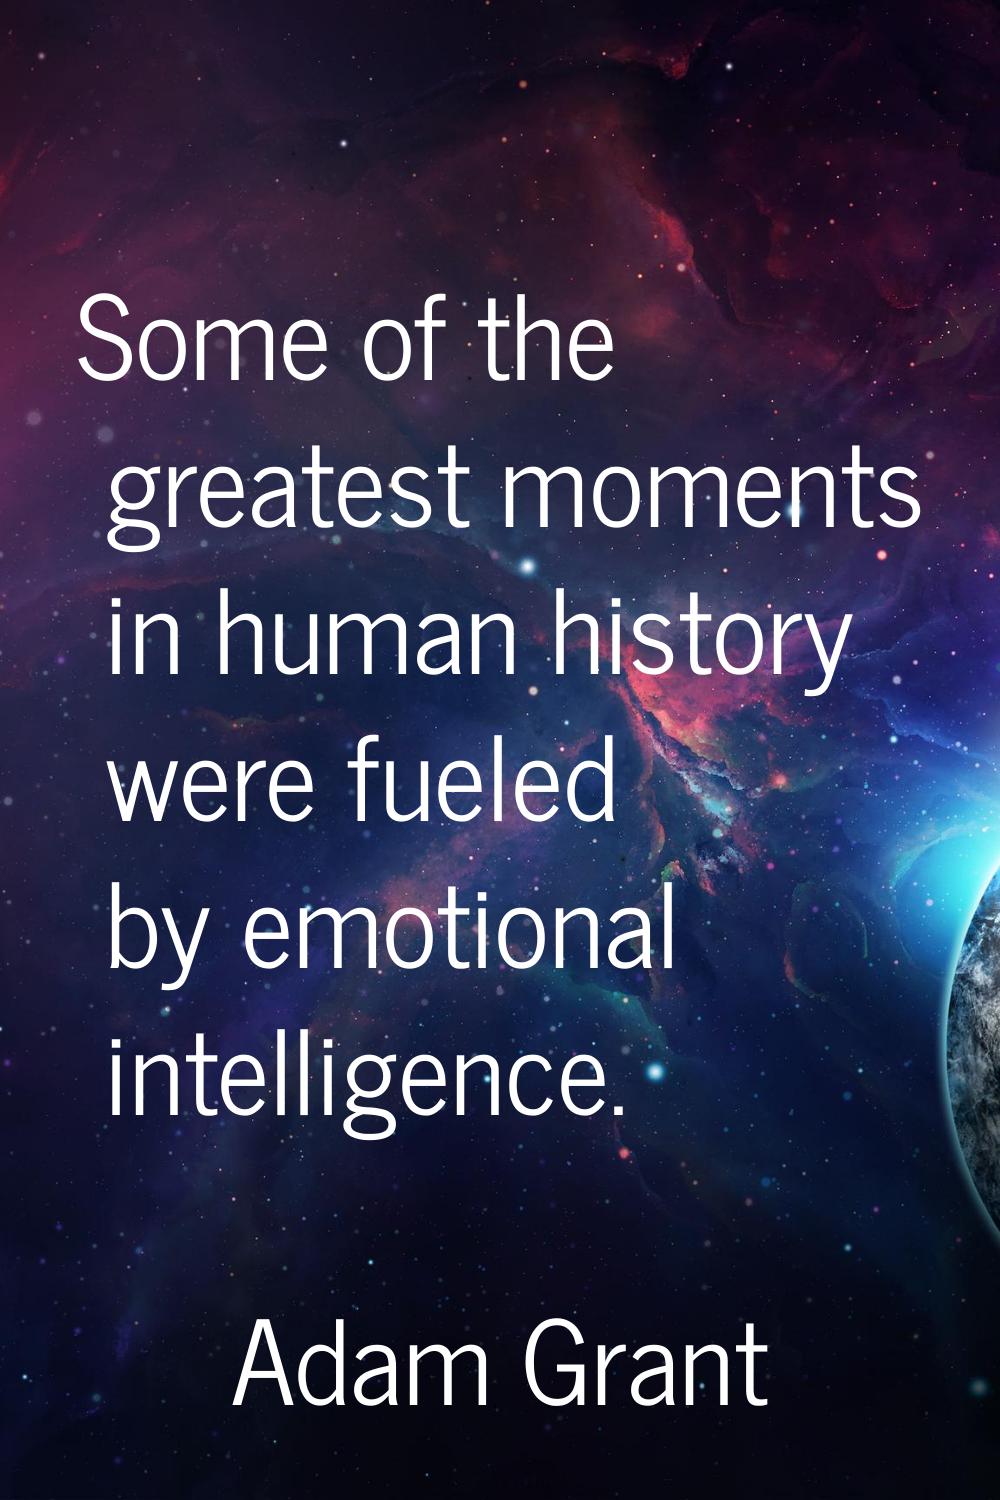 Some of the greatest moments in human history were fueled by emotional intelligence.